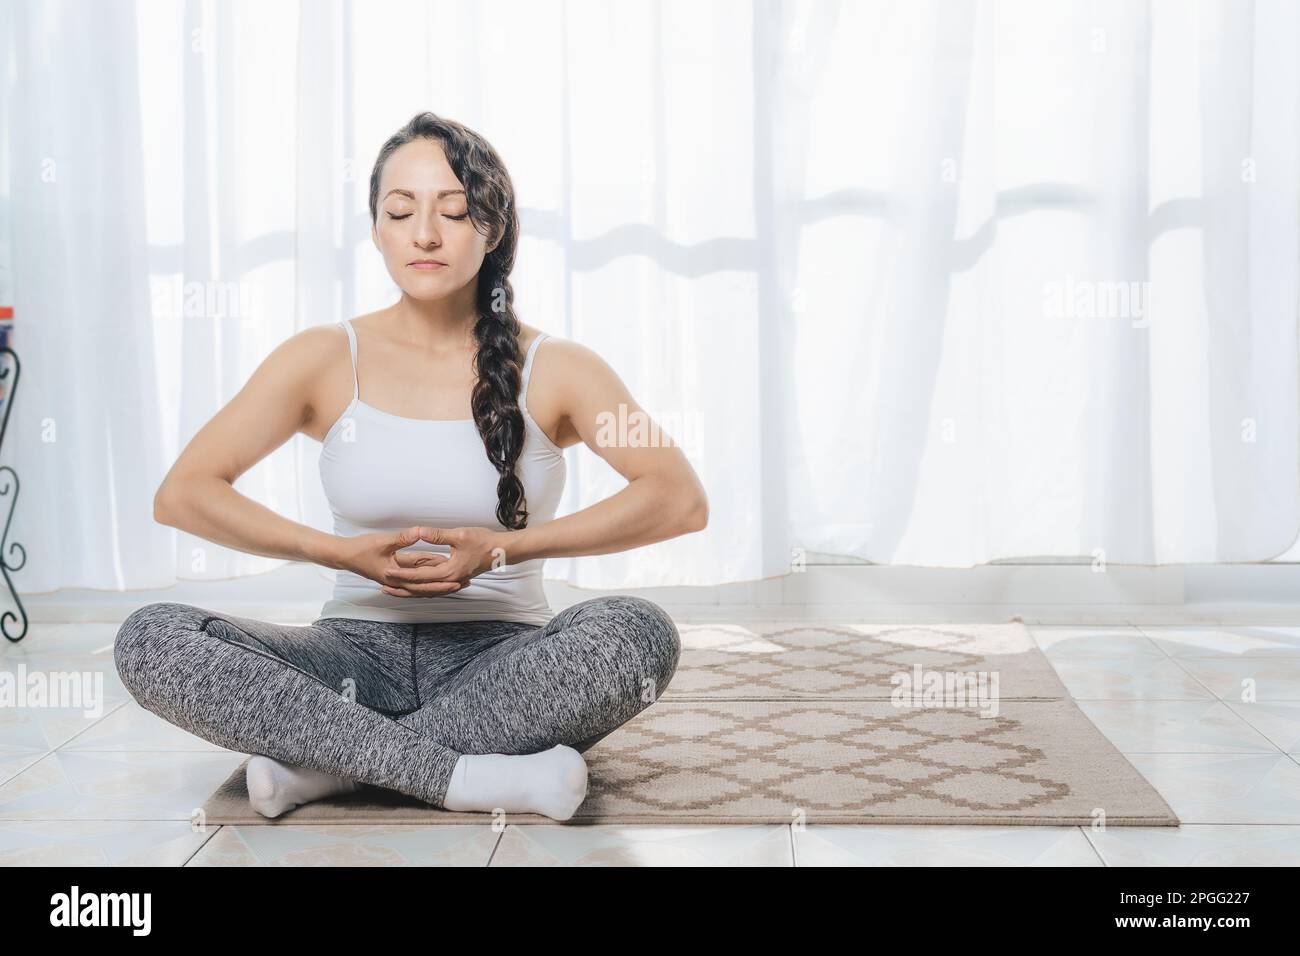 A woman does Yoga indoors, lots of sunlight comes in through the window, she does deep meditation postures. It is very quiet. Stock Photo